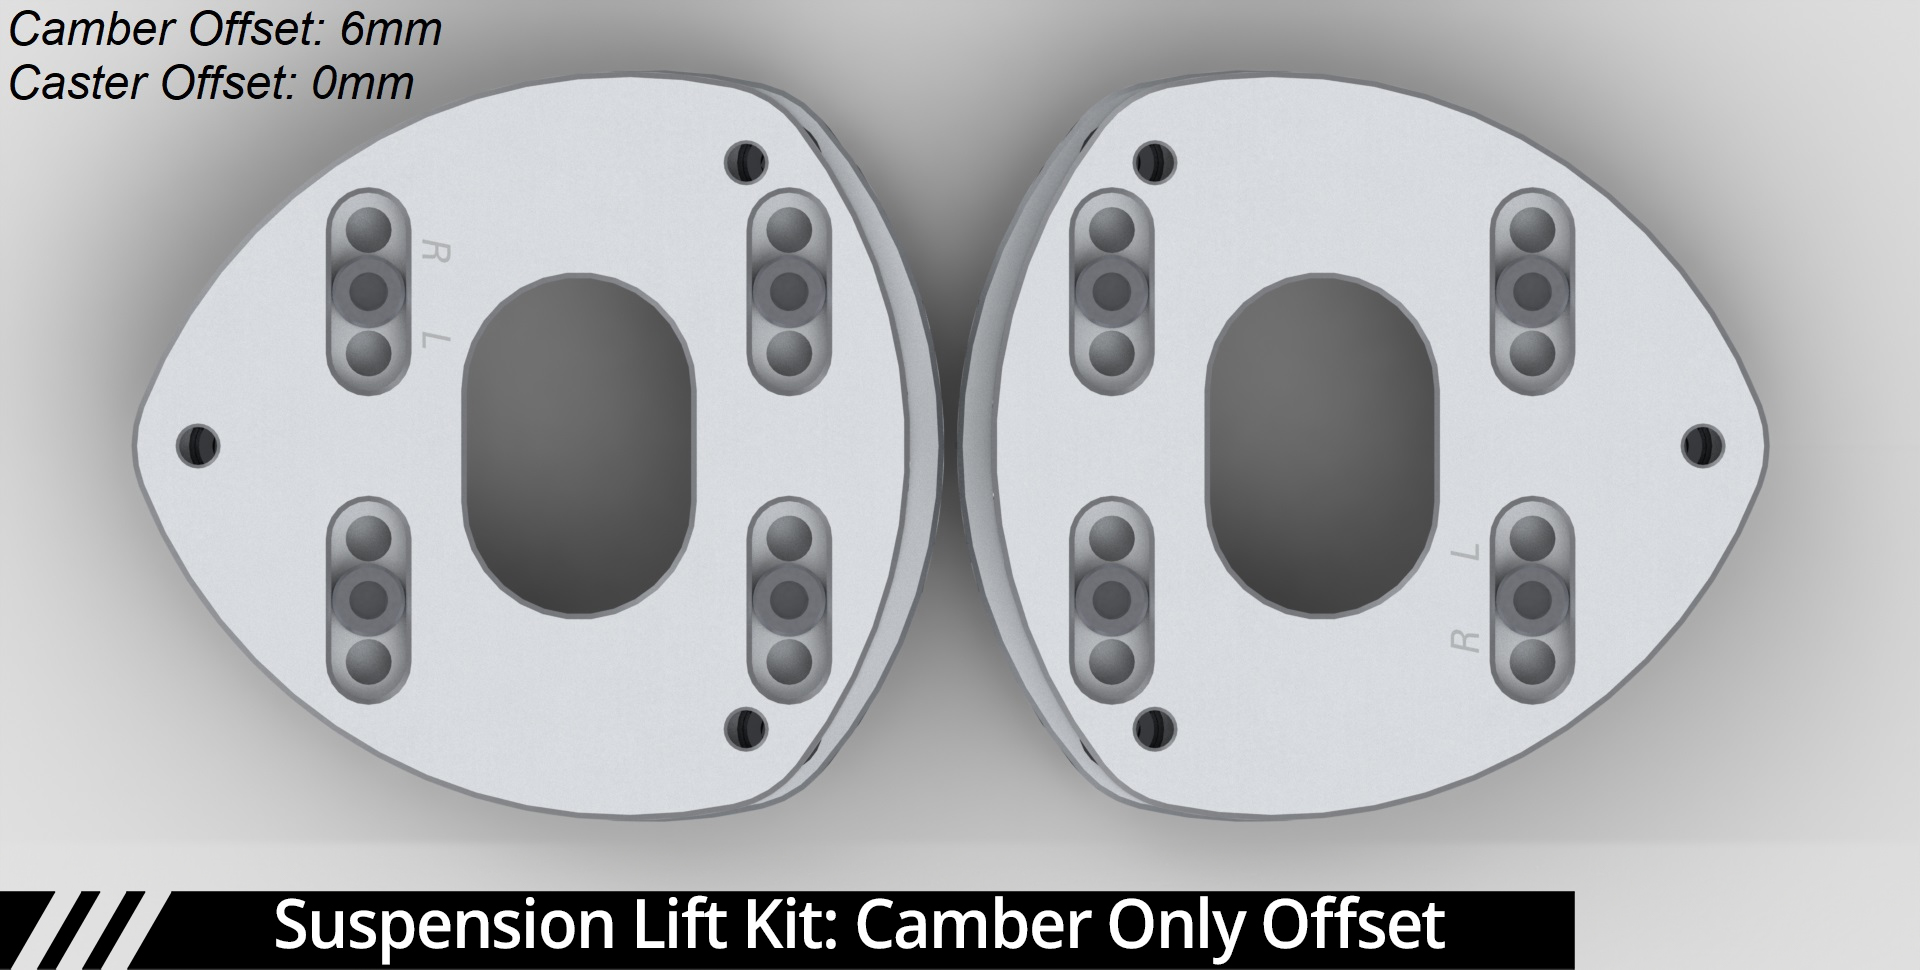 Suspension Lift Kit: Camber Only Offset